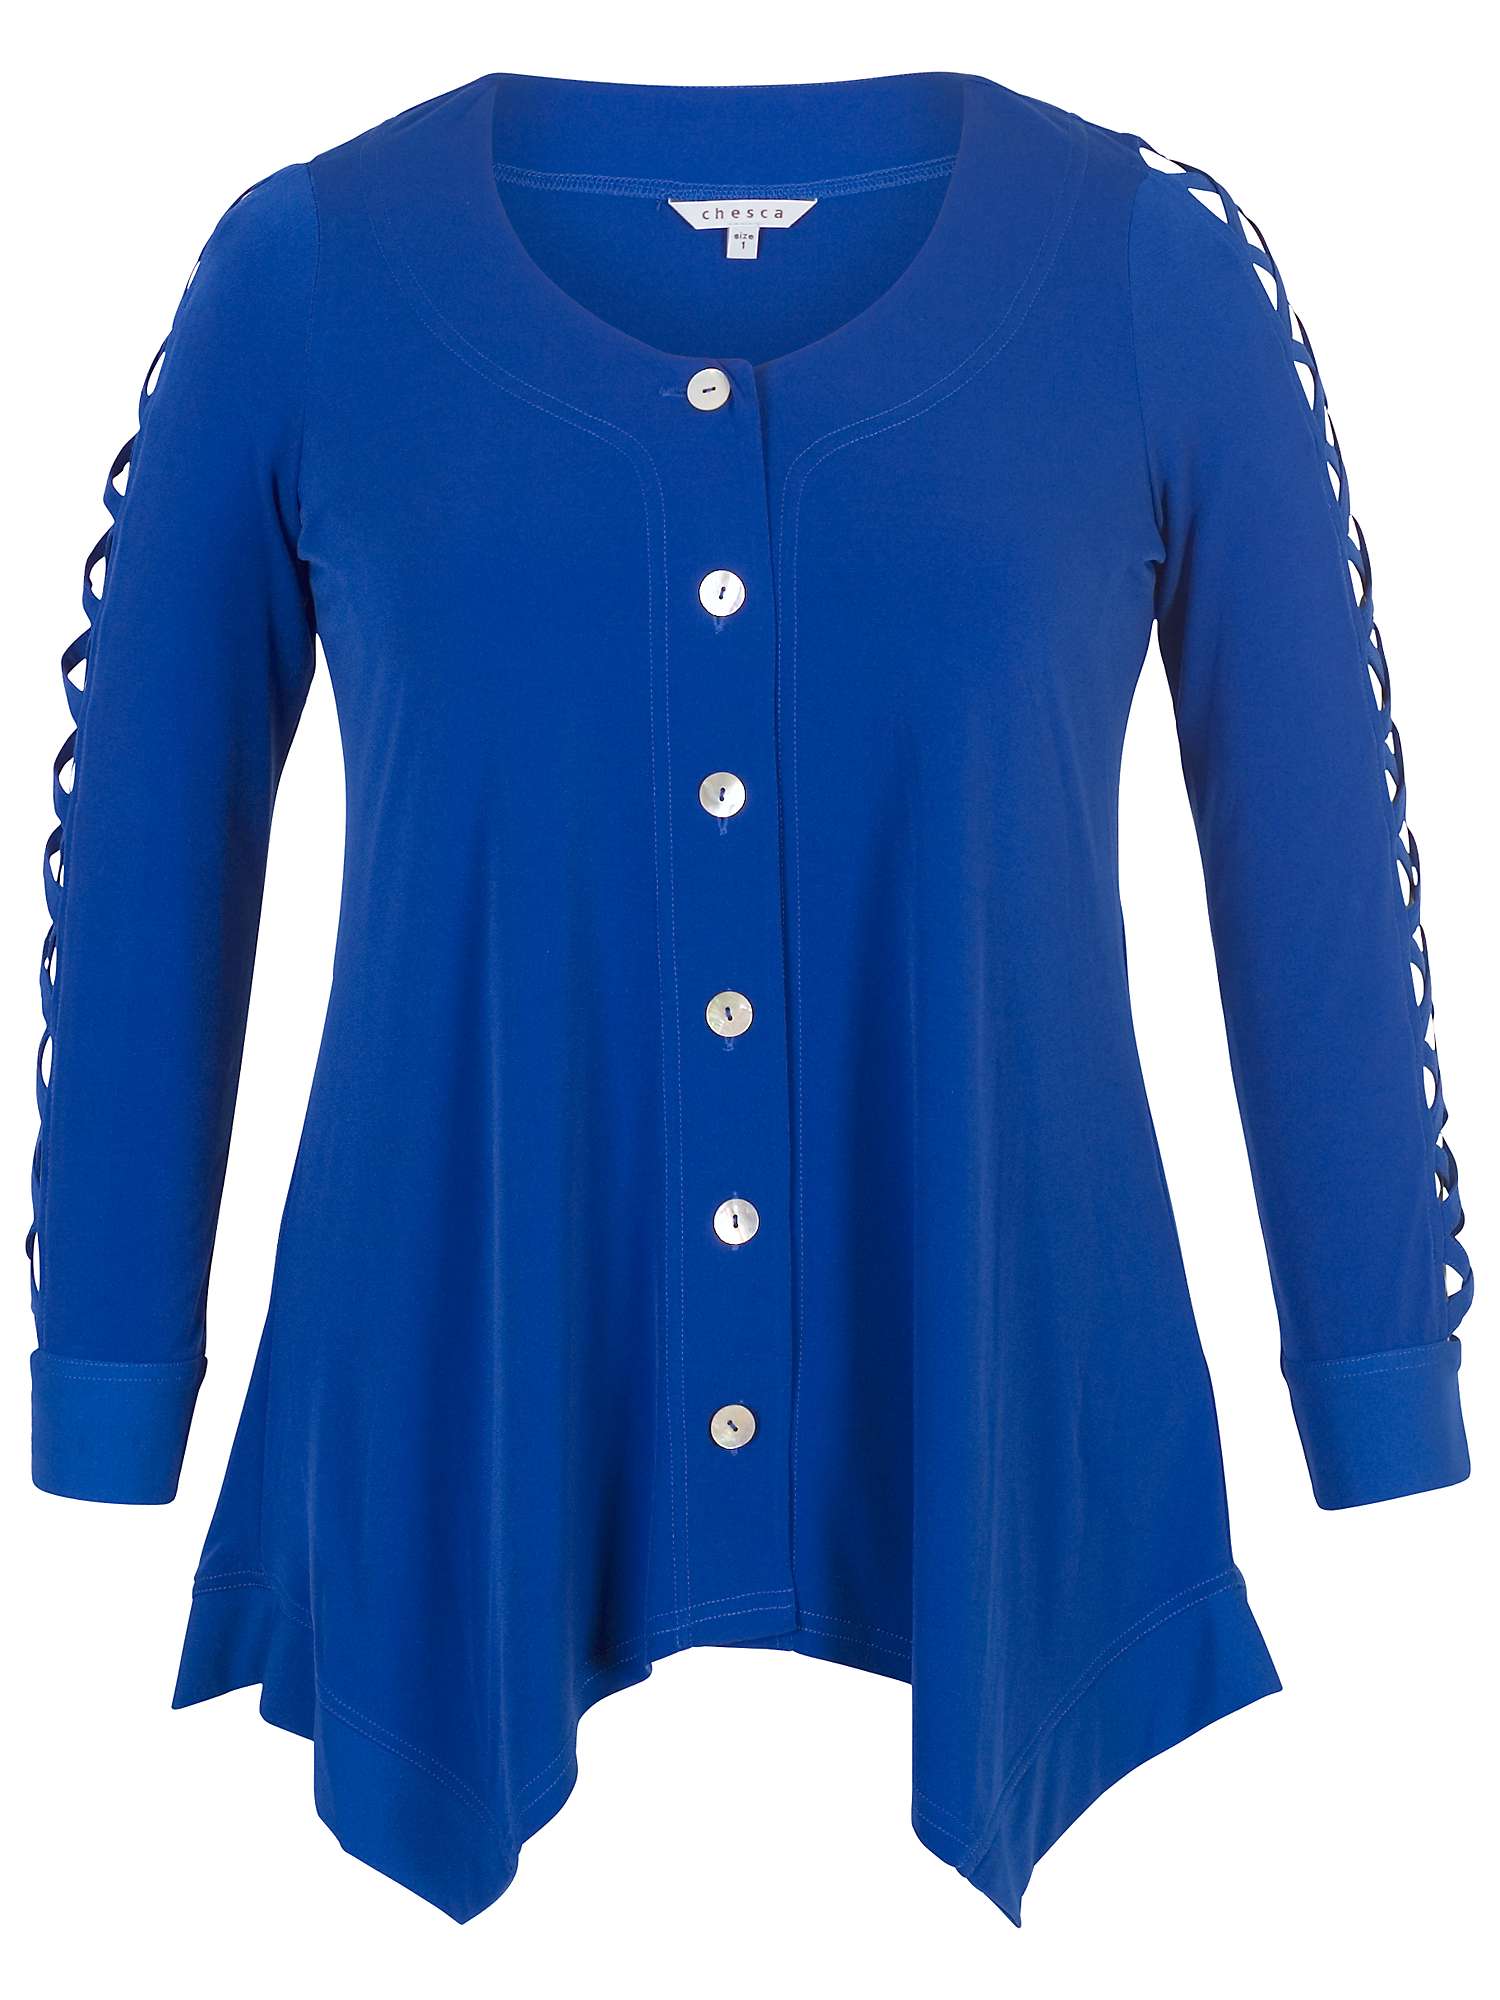 Buy Chesca Criss Cross Tunic Top Online at johnlewis.com